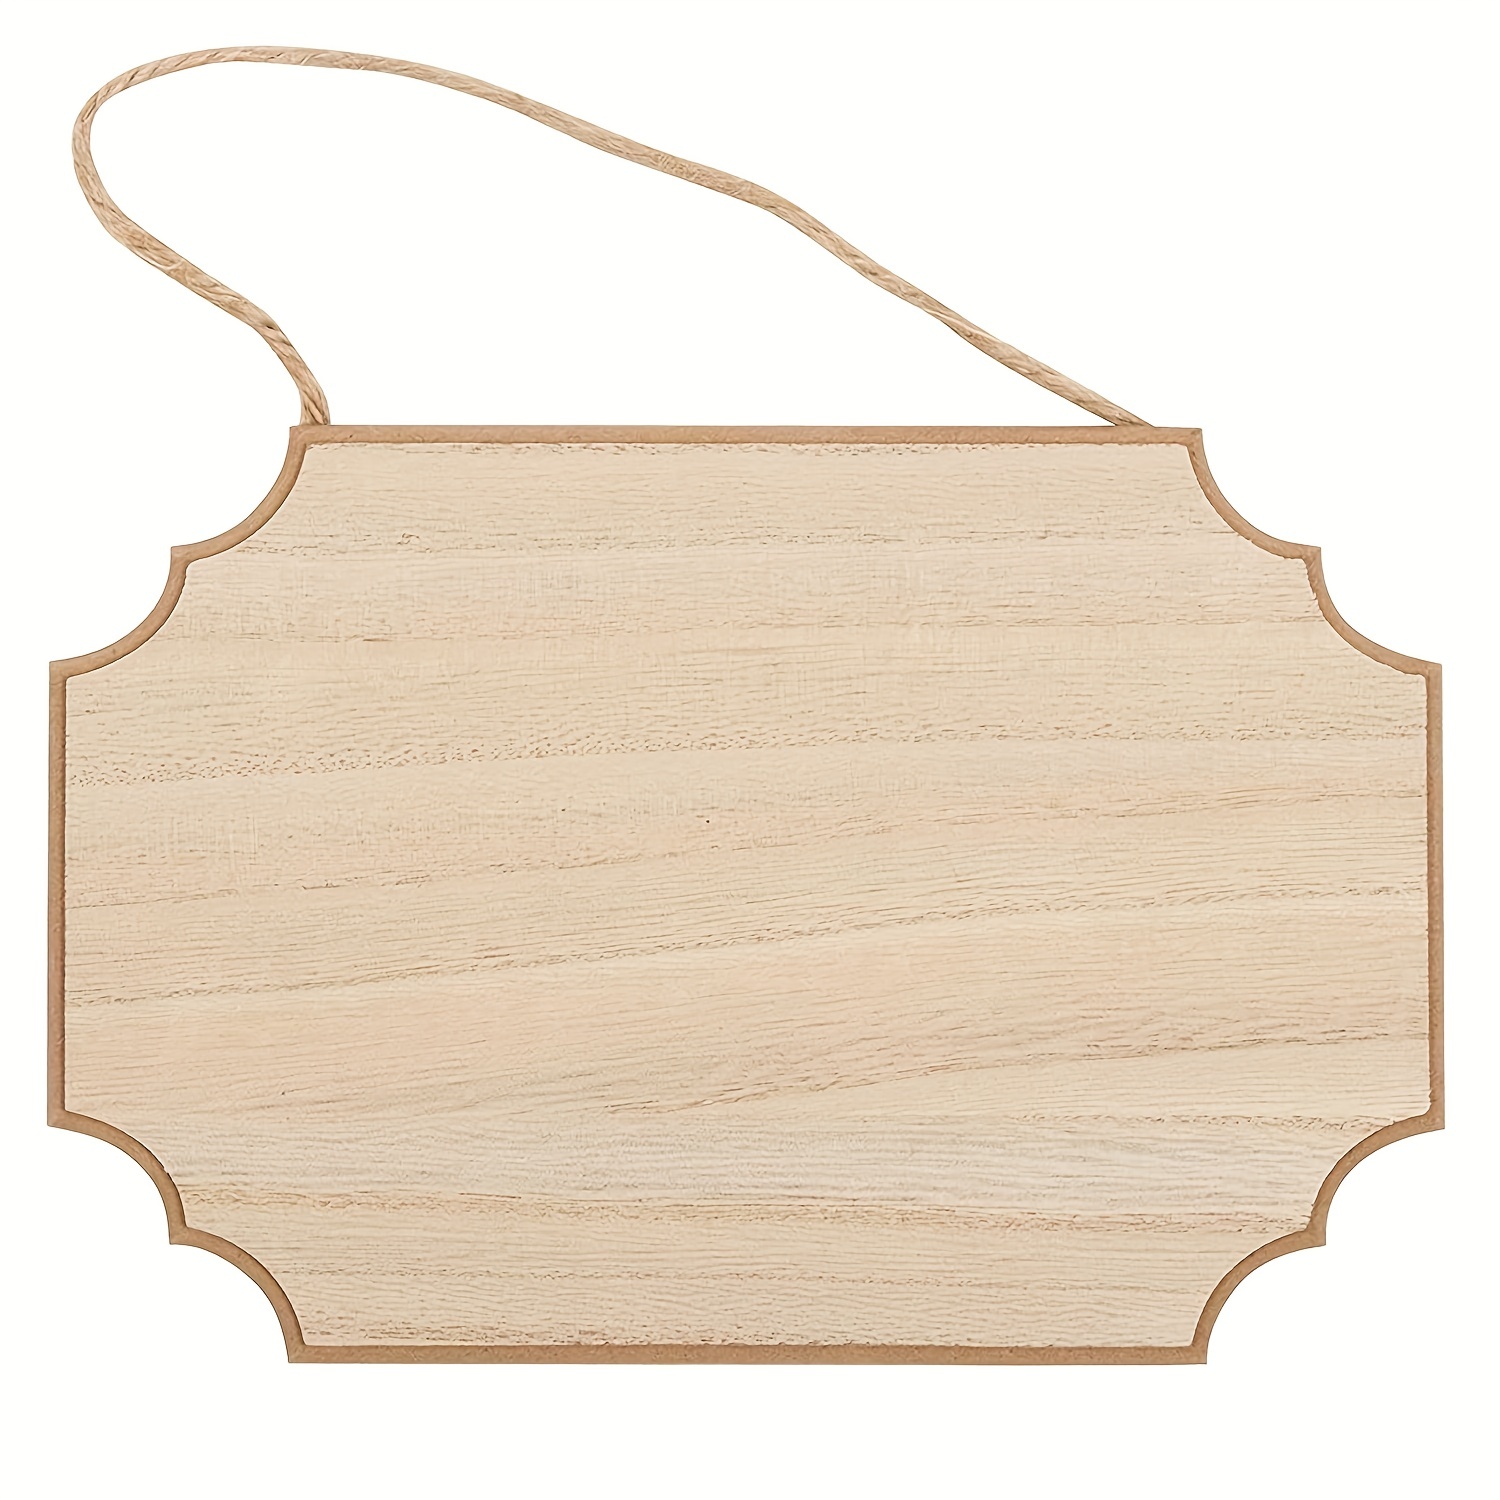 6-Pack of Unfinished MDF Hanging Wood Plaques for Crafts with Jute